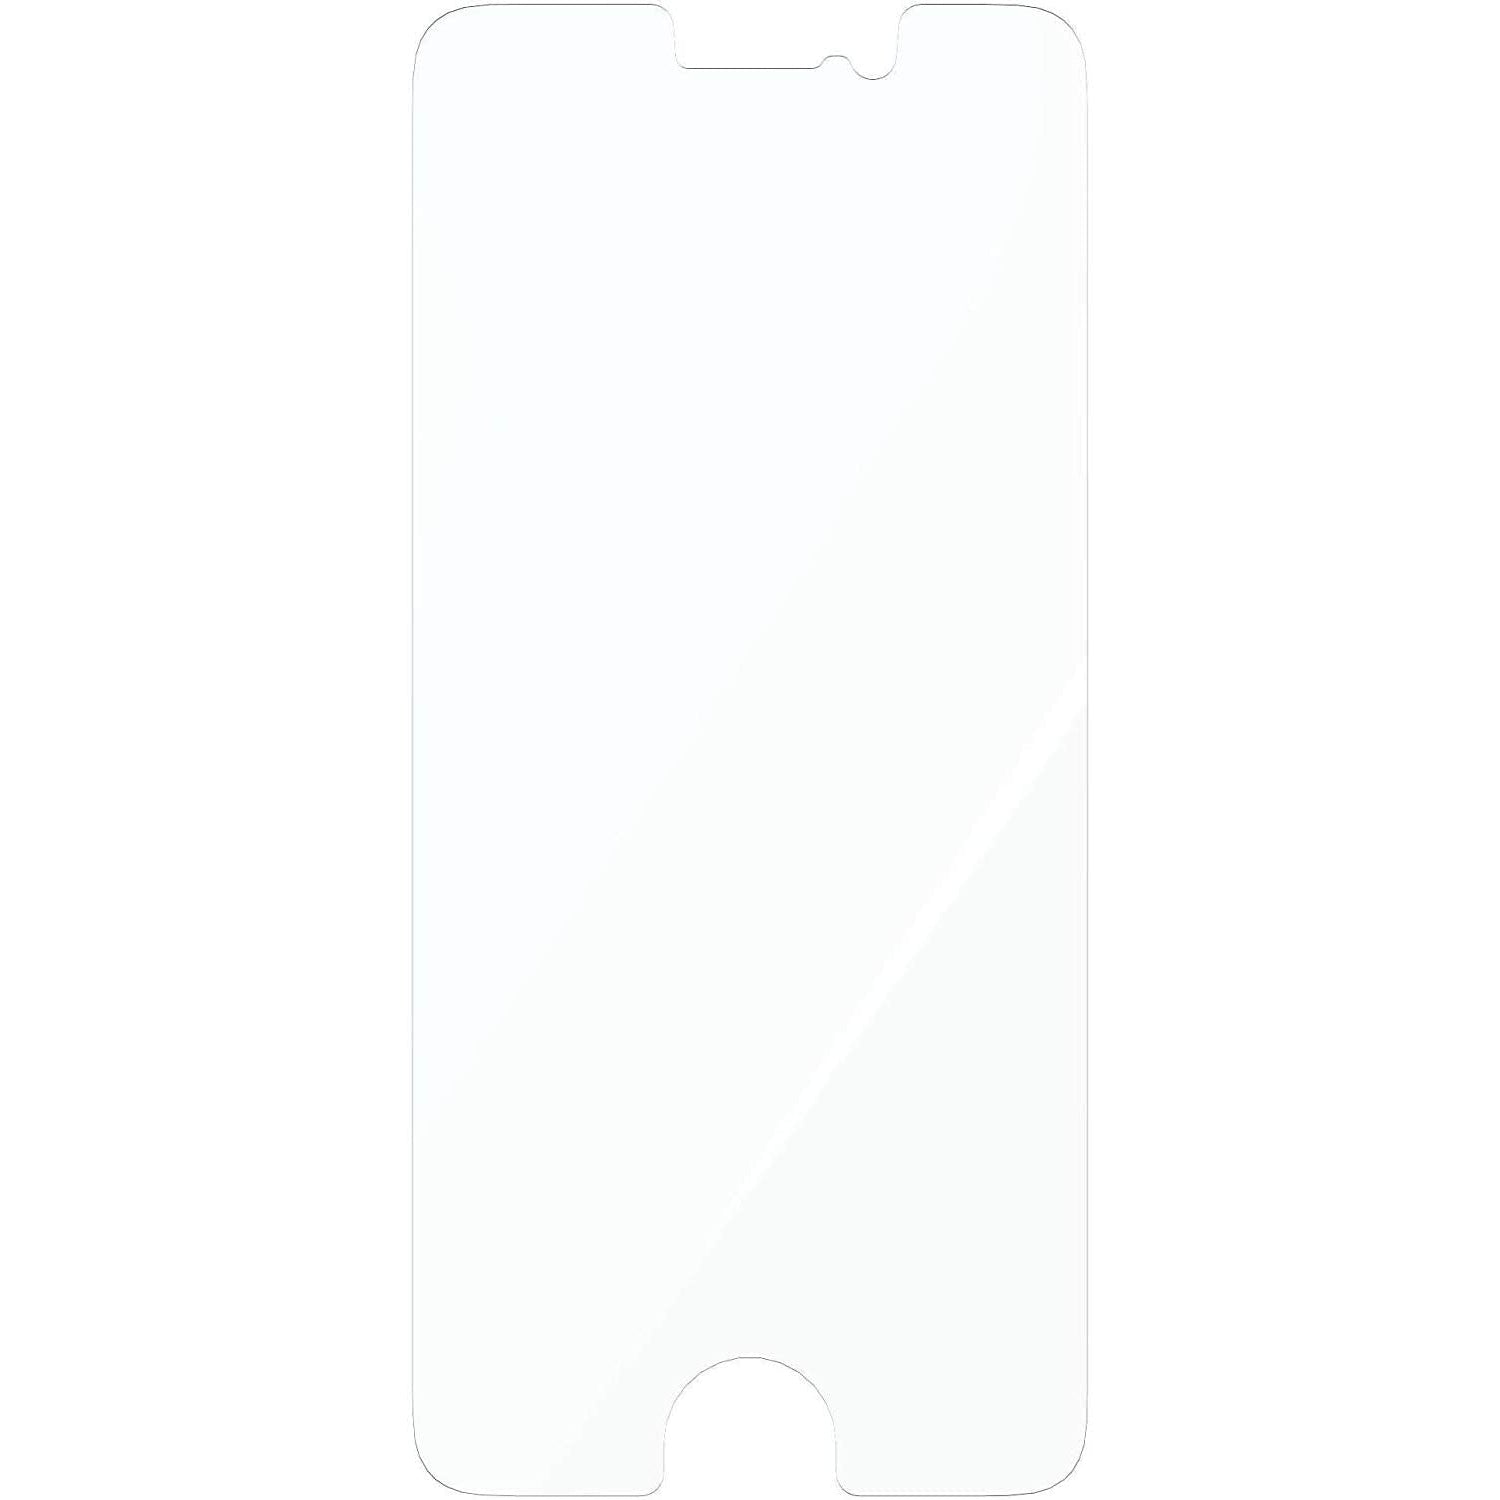 Tech21 Evo Glass Screen Protector for Apple iPhone 7 - Clear - Refurbished